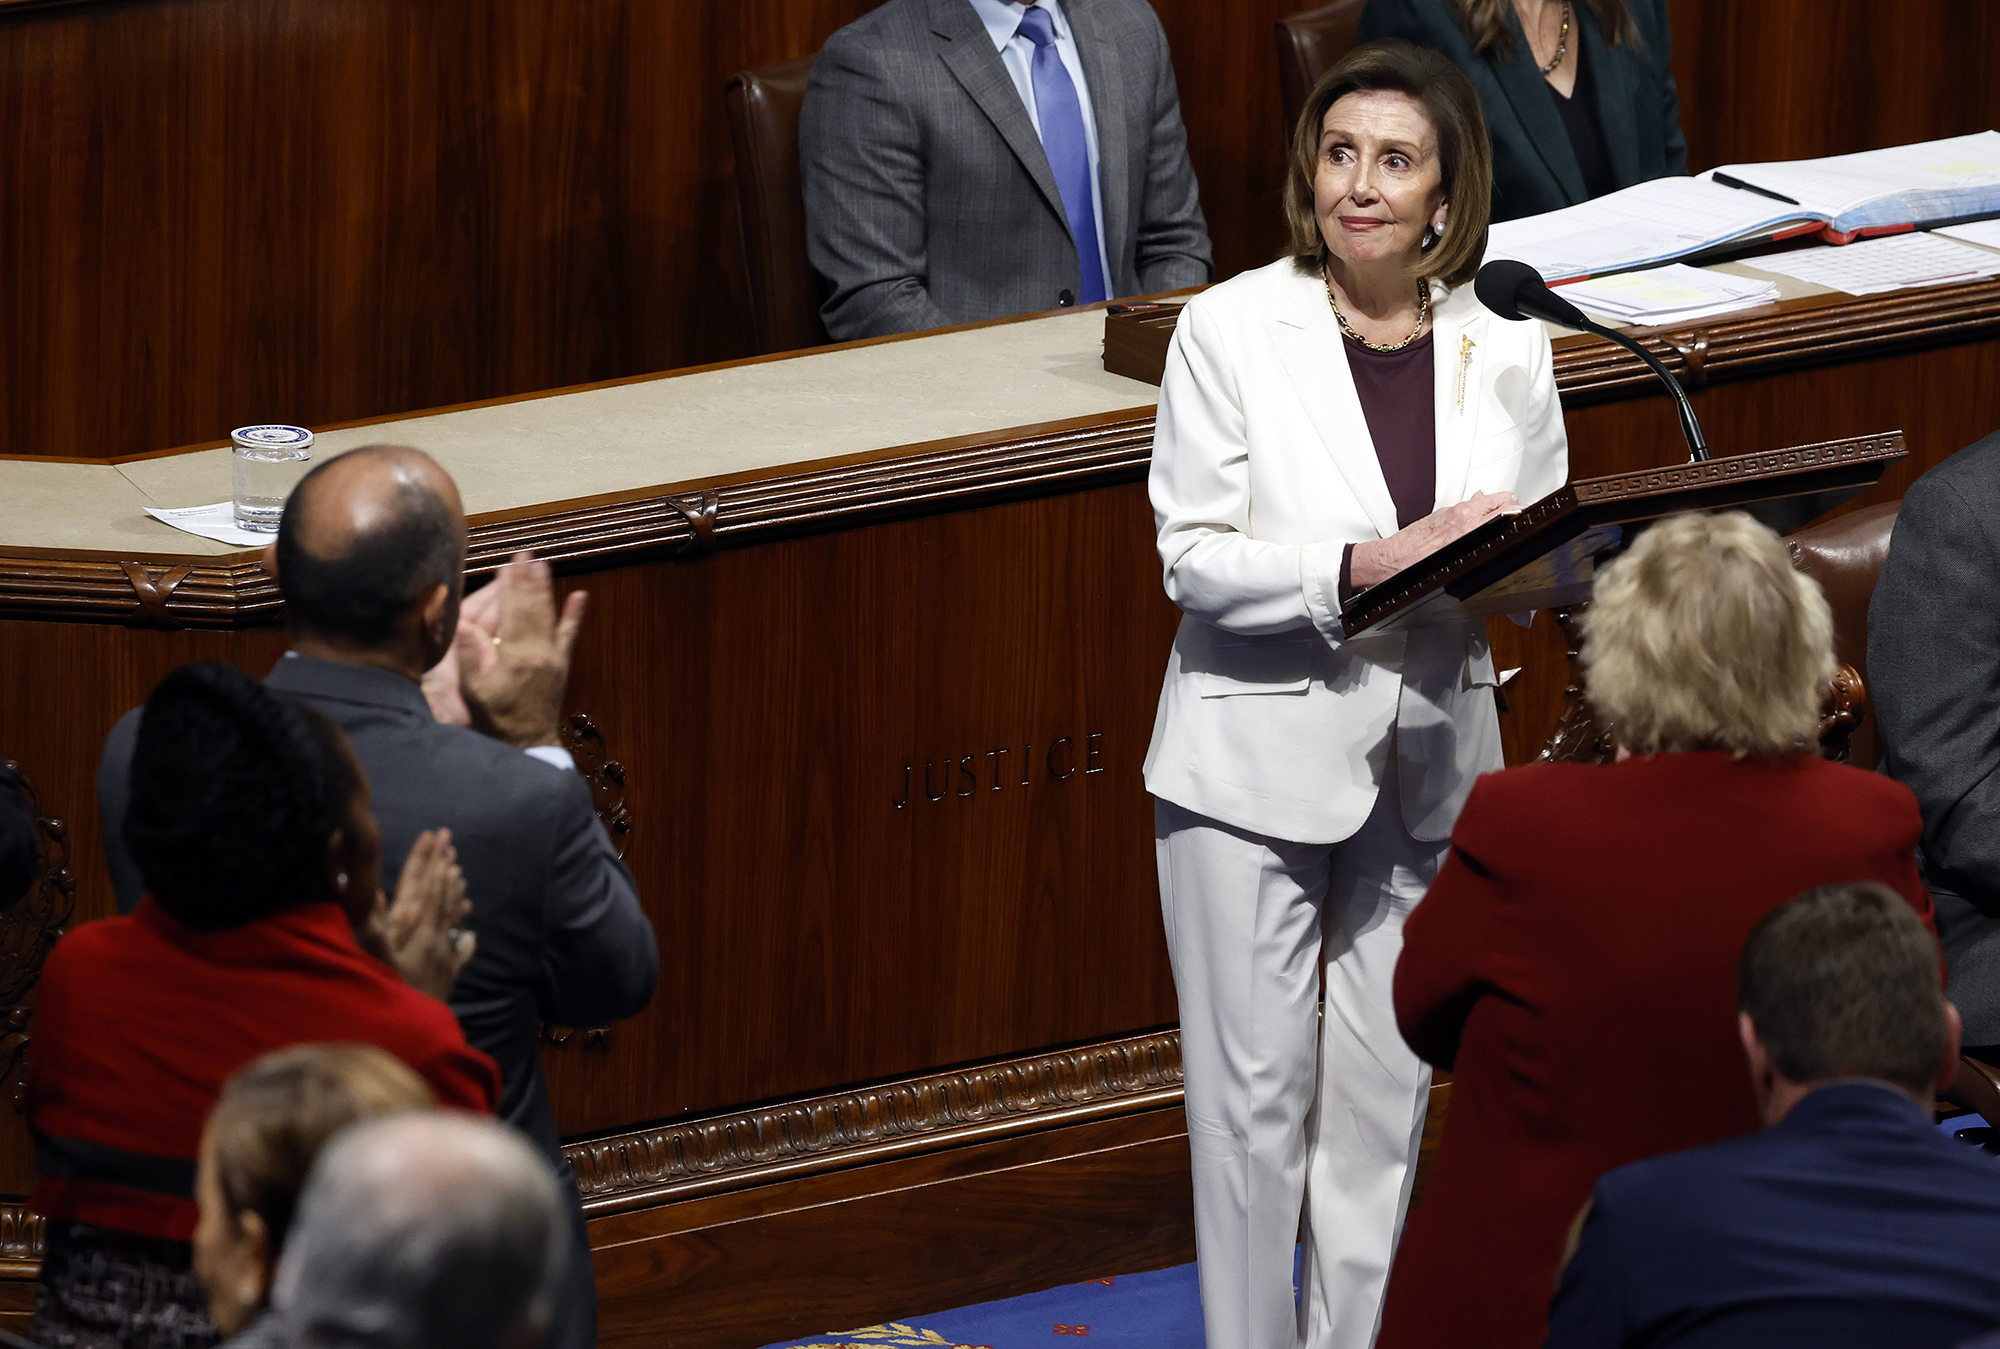 PHOTO: Speaker of the House Nancy Pelosi delivers remarks from the House Chambers of the U.S. Capitol, Nov. 17, 2022.